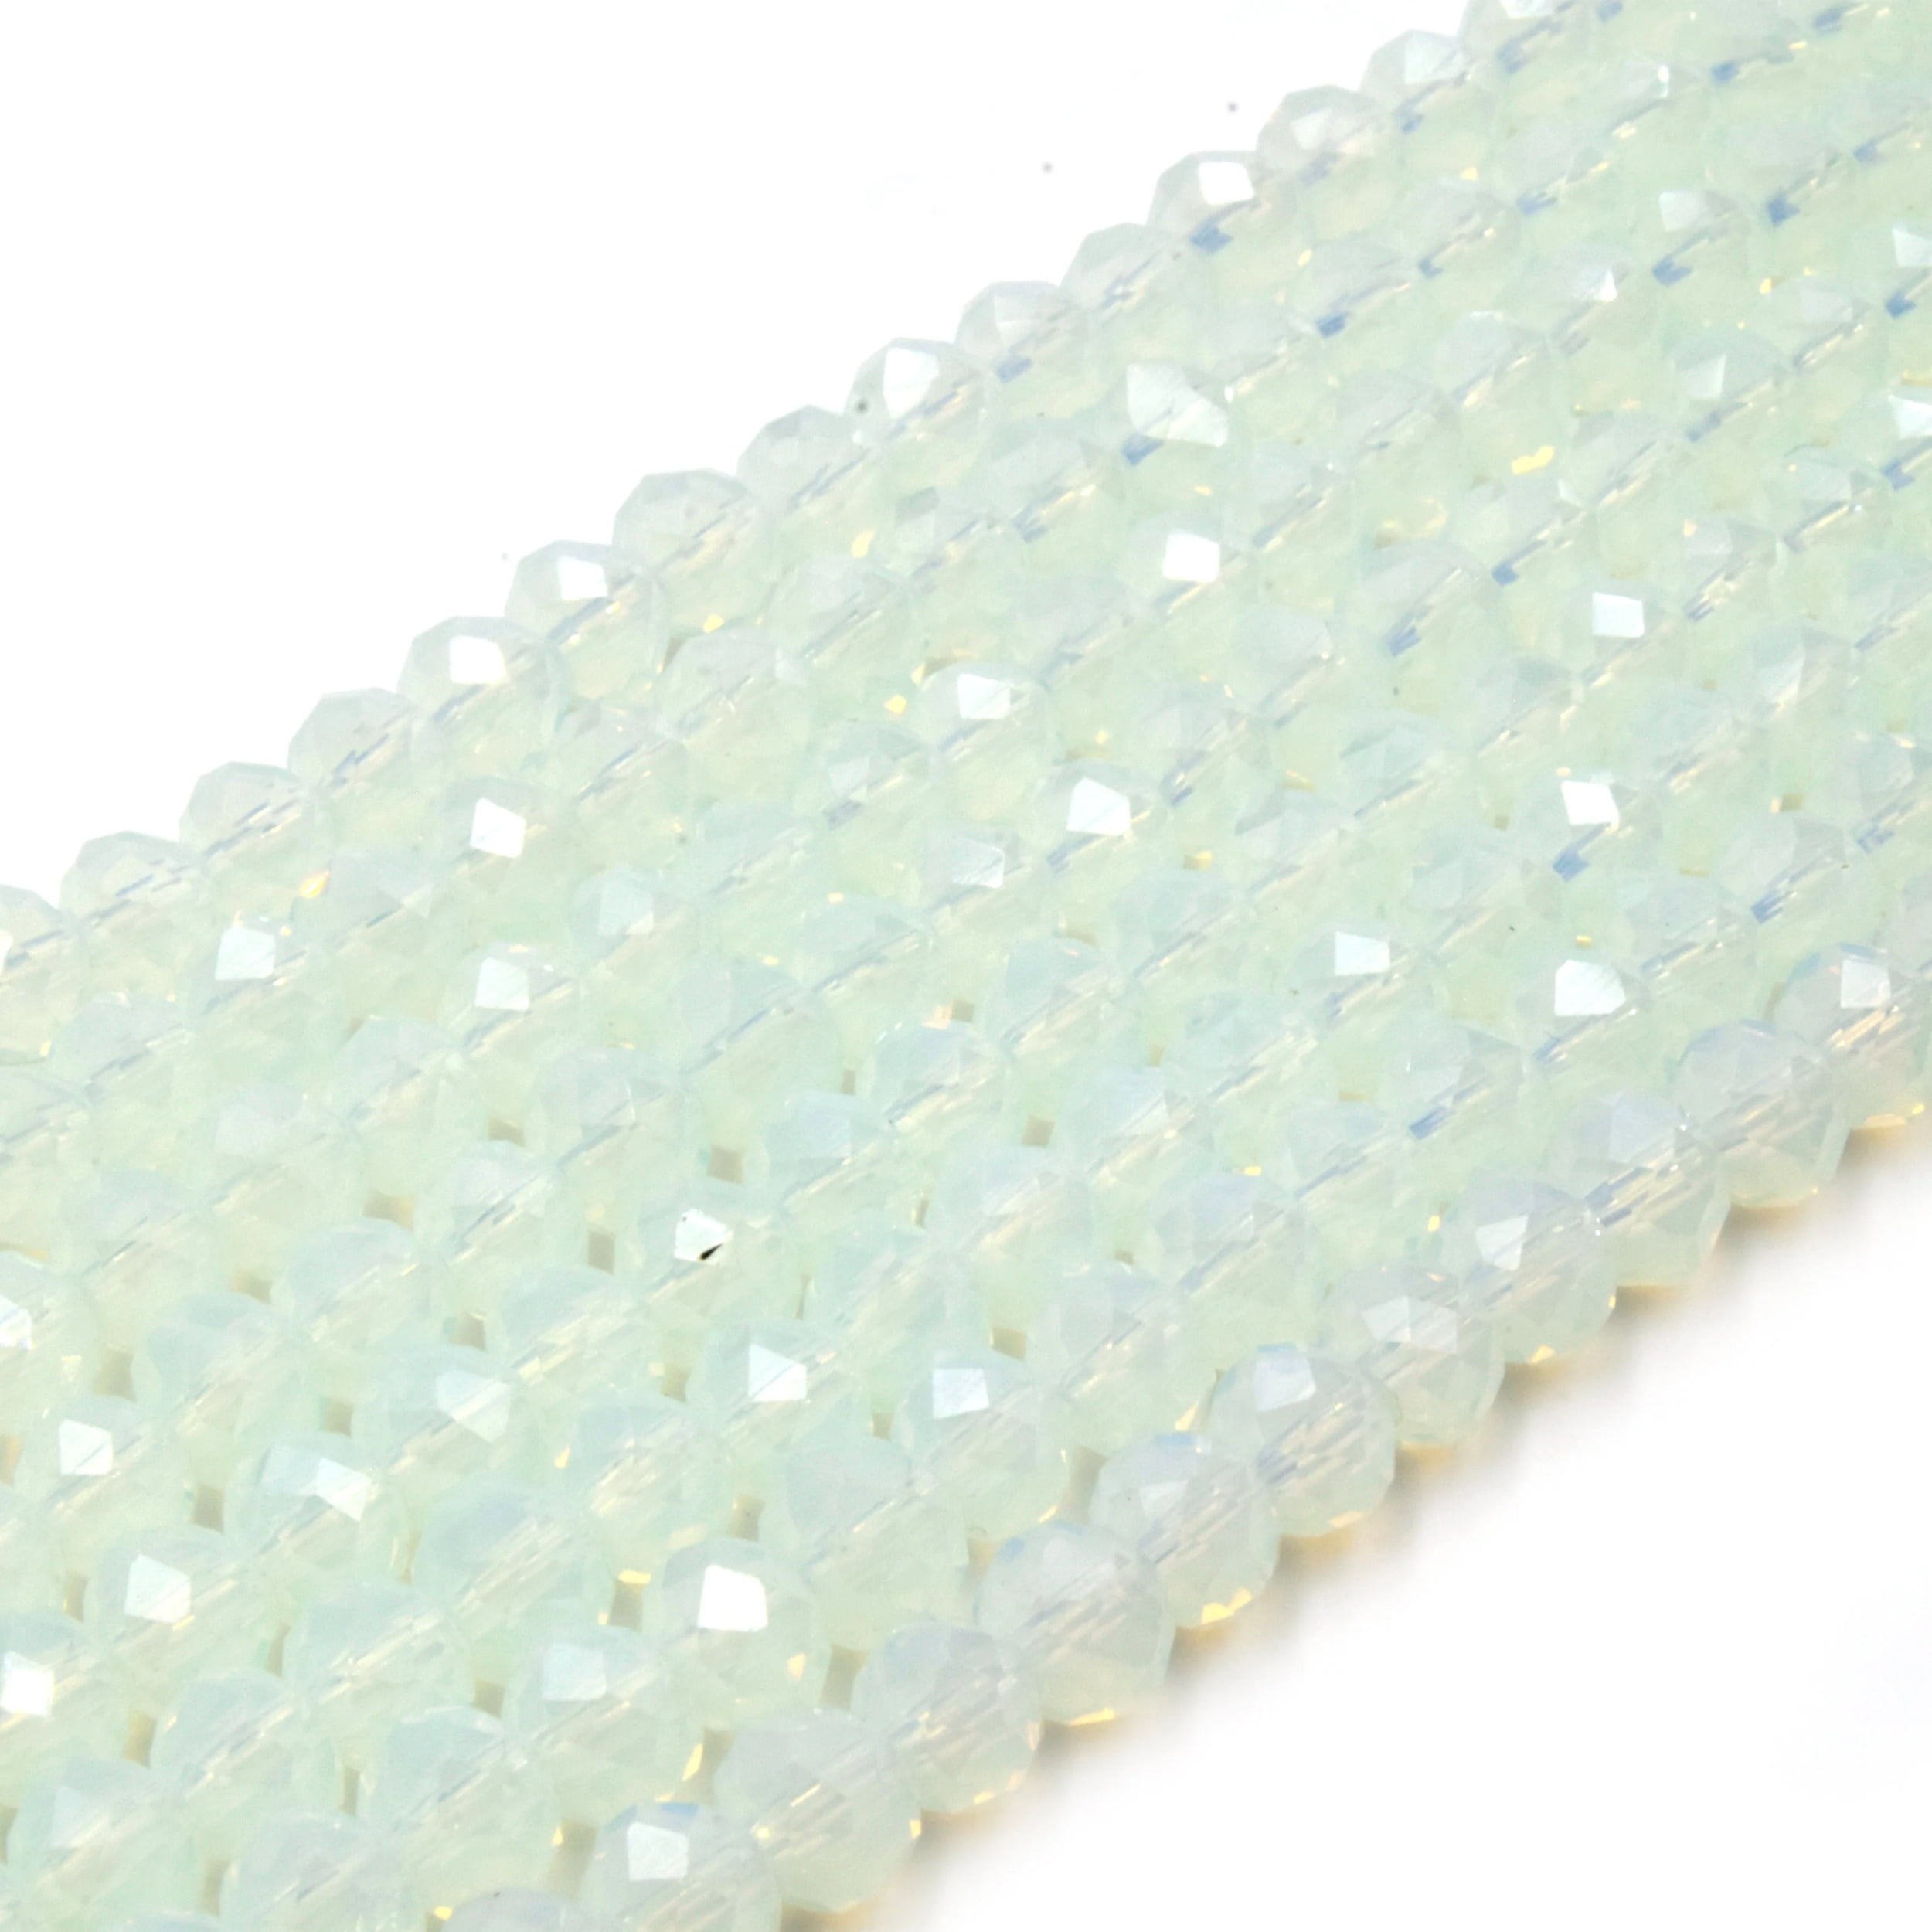 4mm Glass Faceted Beads, Cornflower, Blue Seed Beads, Jewelry